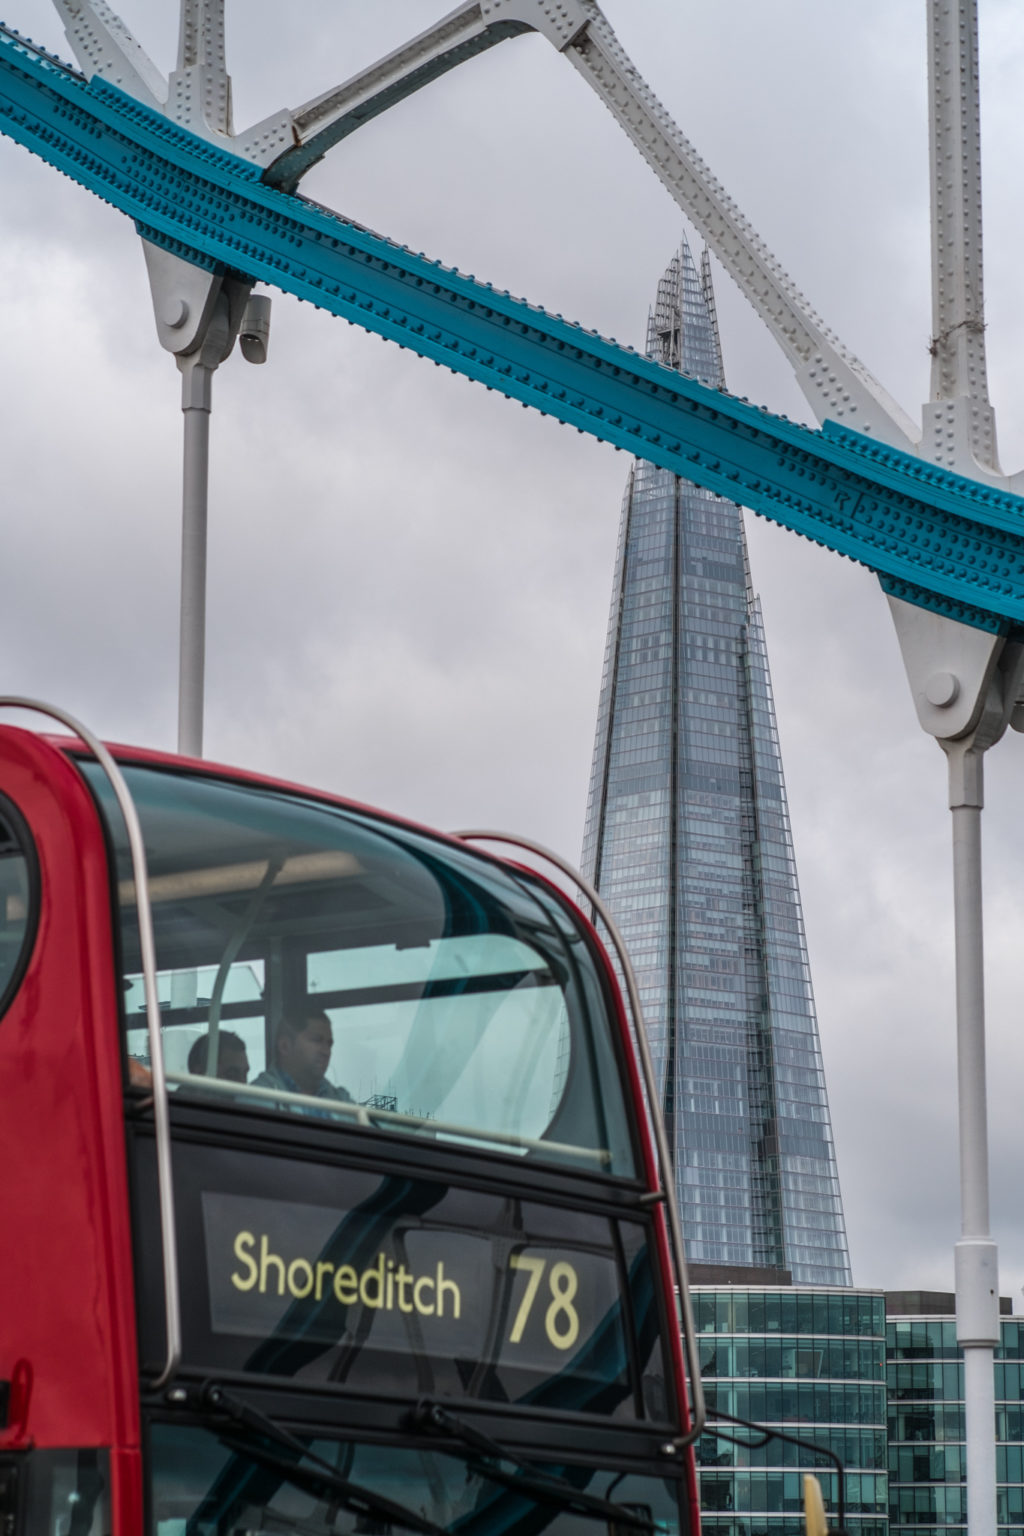 A red bus crosses Tower Bridge with the Shard London in the